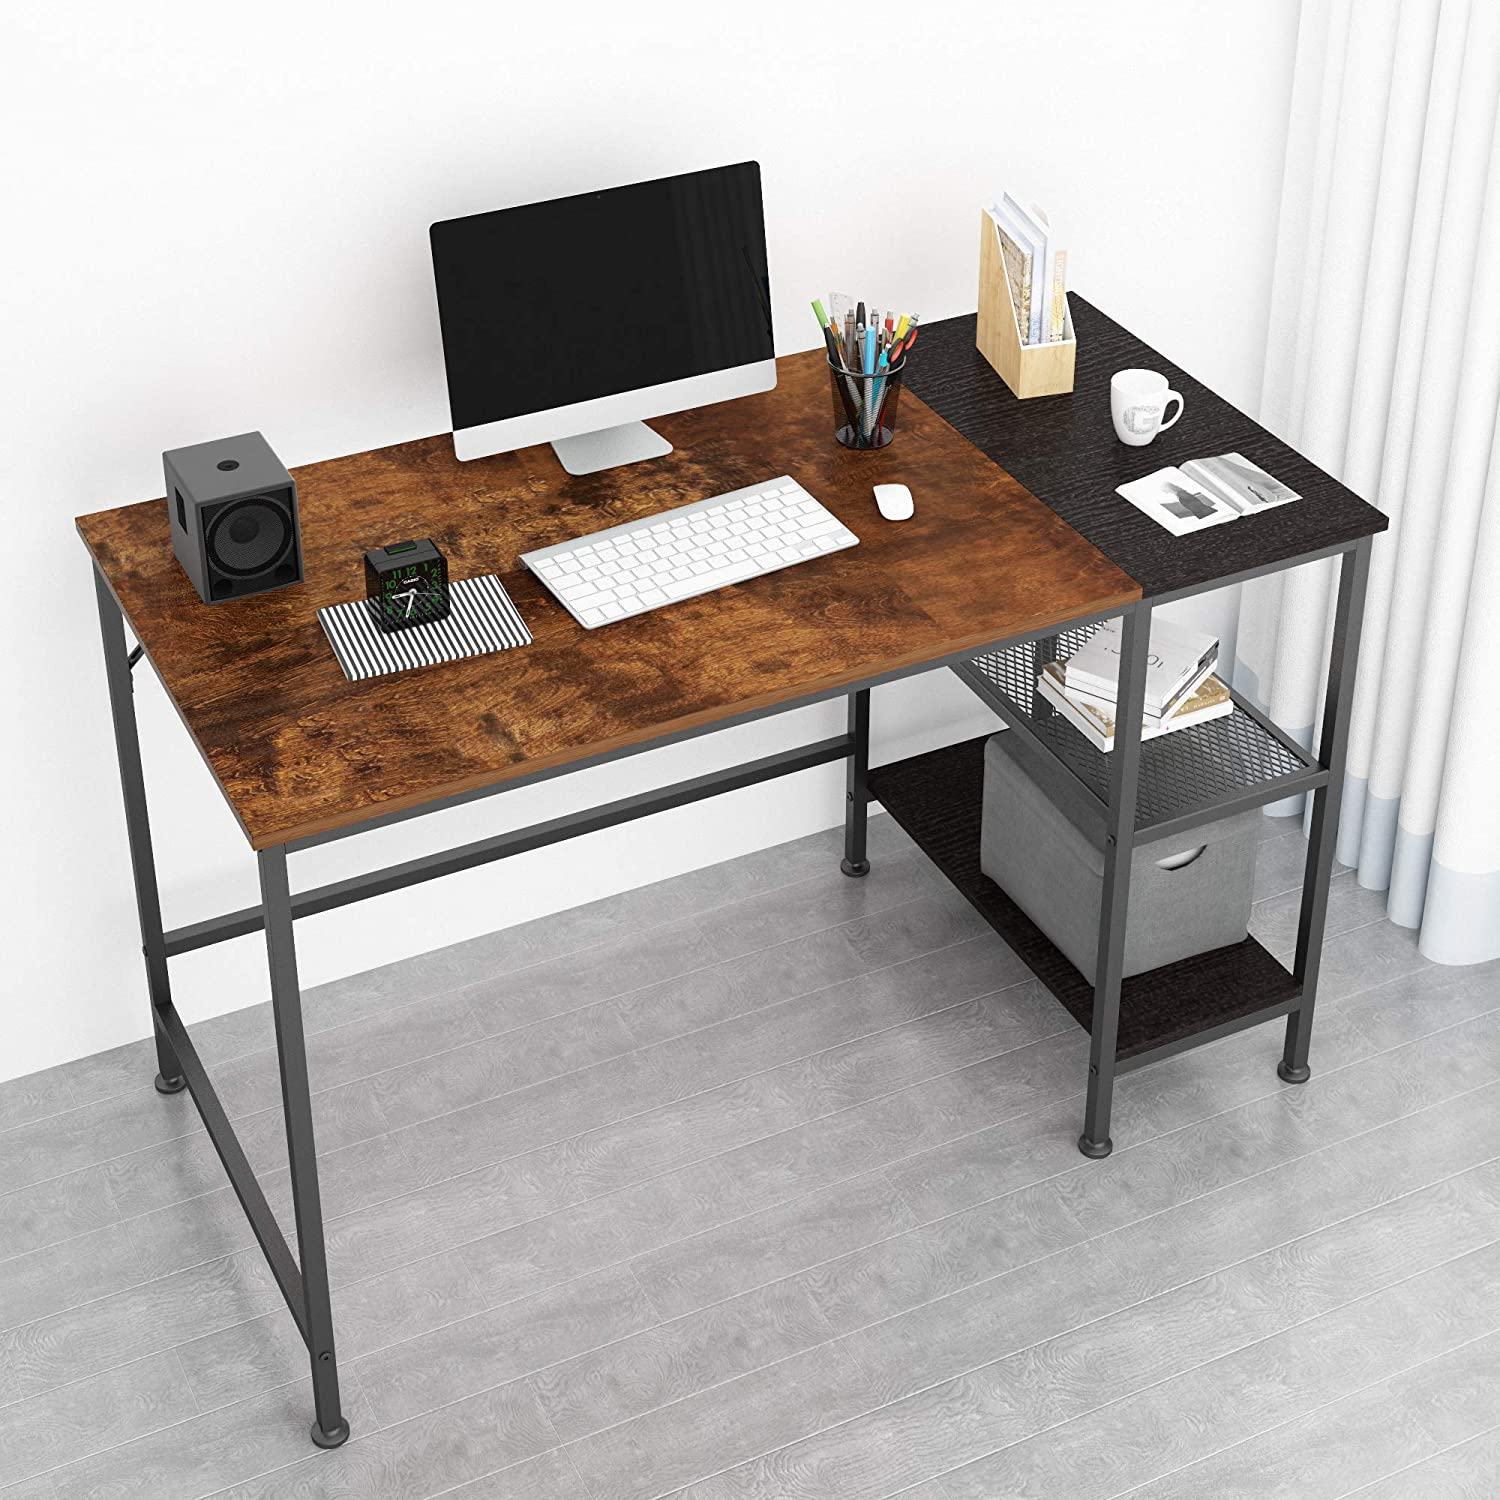 JOISCOPE Computer Desk with Shelves,Laptop Table with Grid Drawer,47 inches(Vintage Oak Finish)